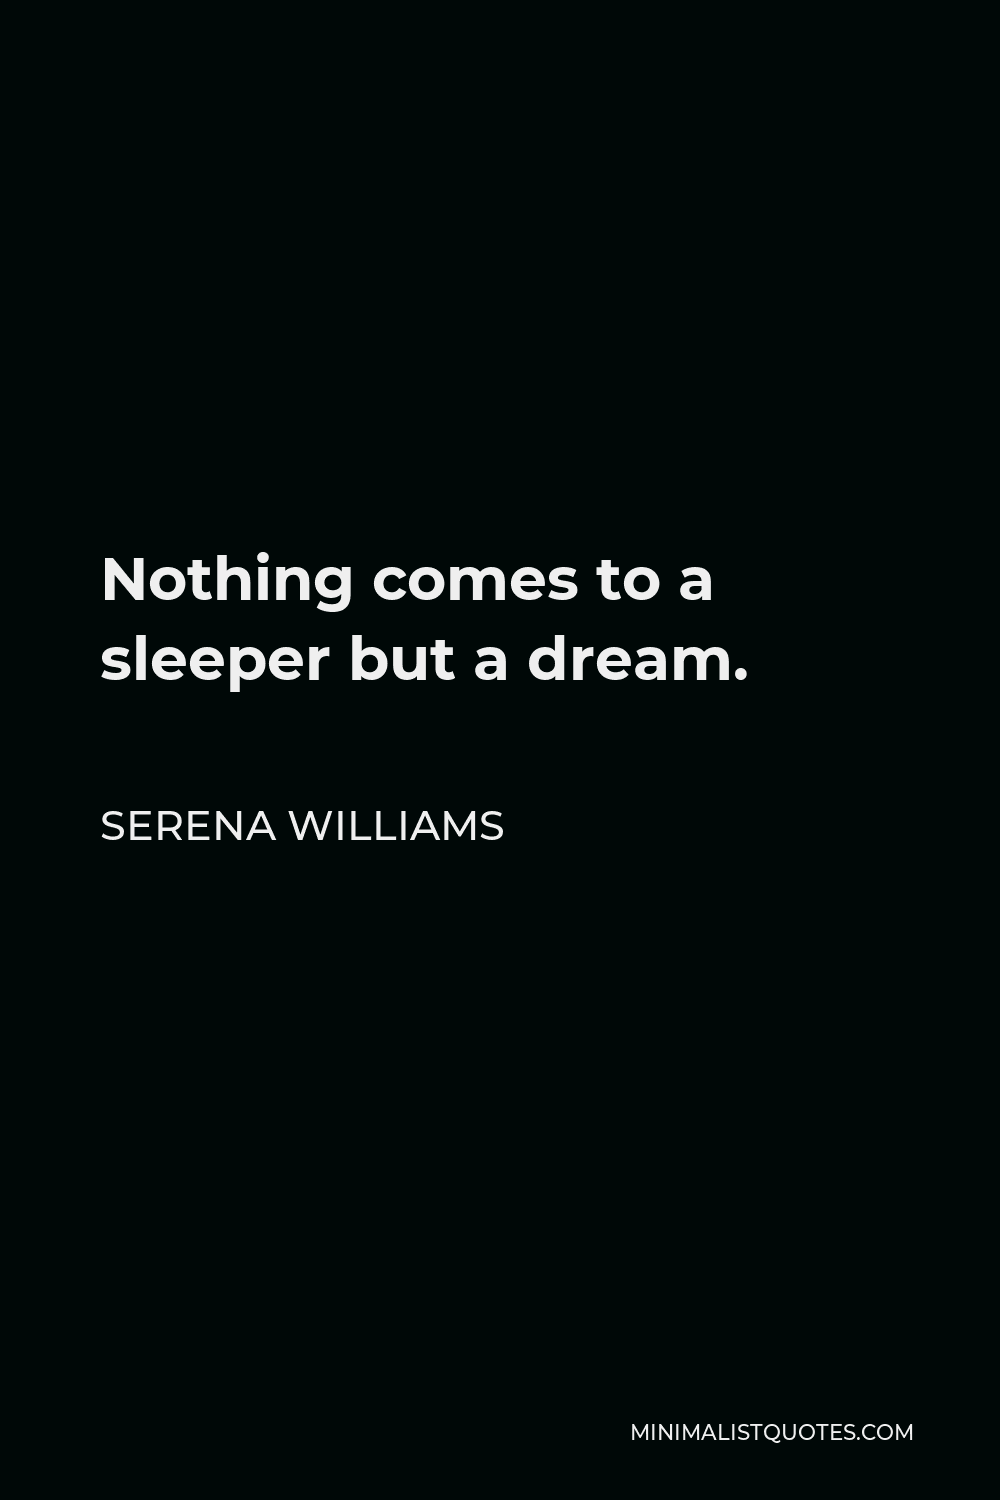 Serena Williams Quote - Nothing comes to a sleeper but a dream.